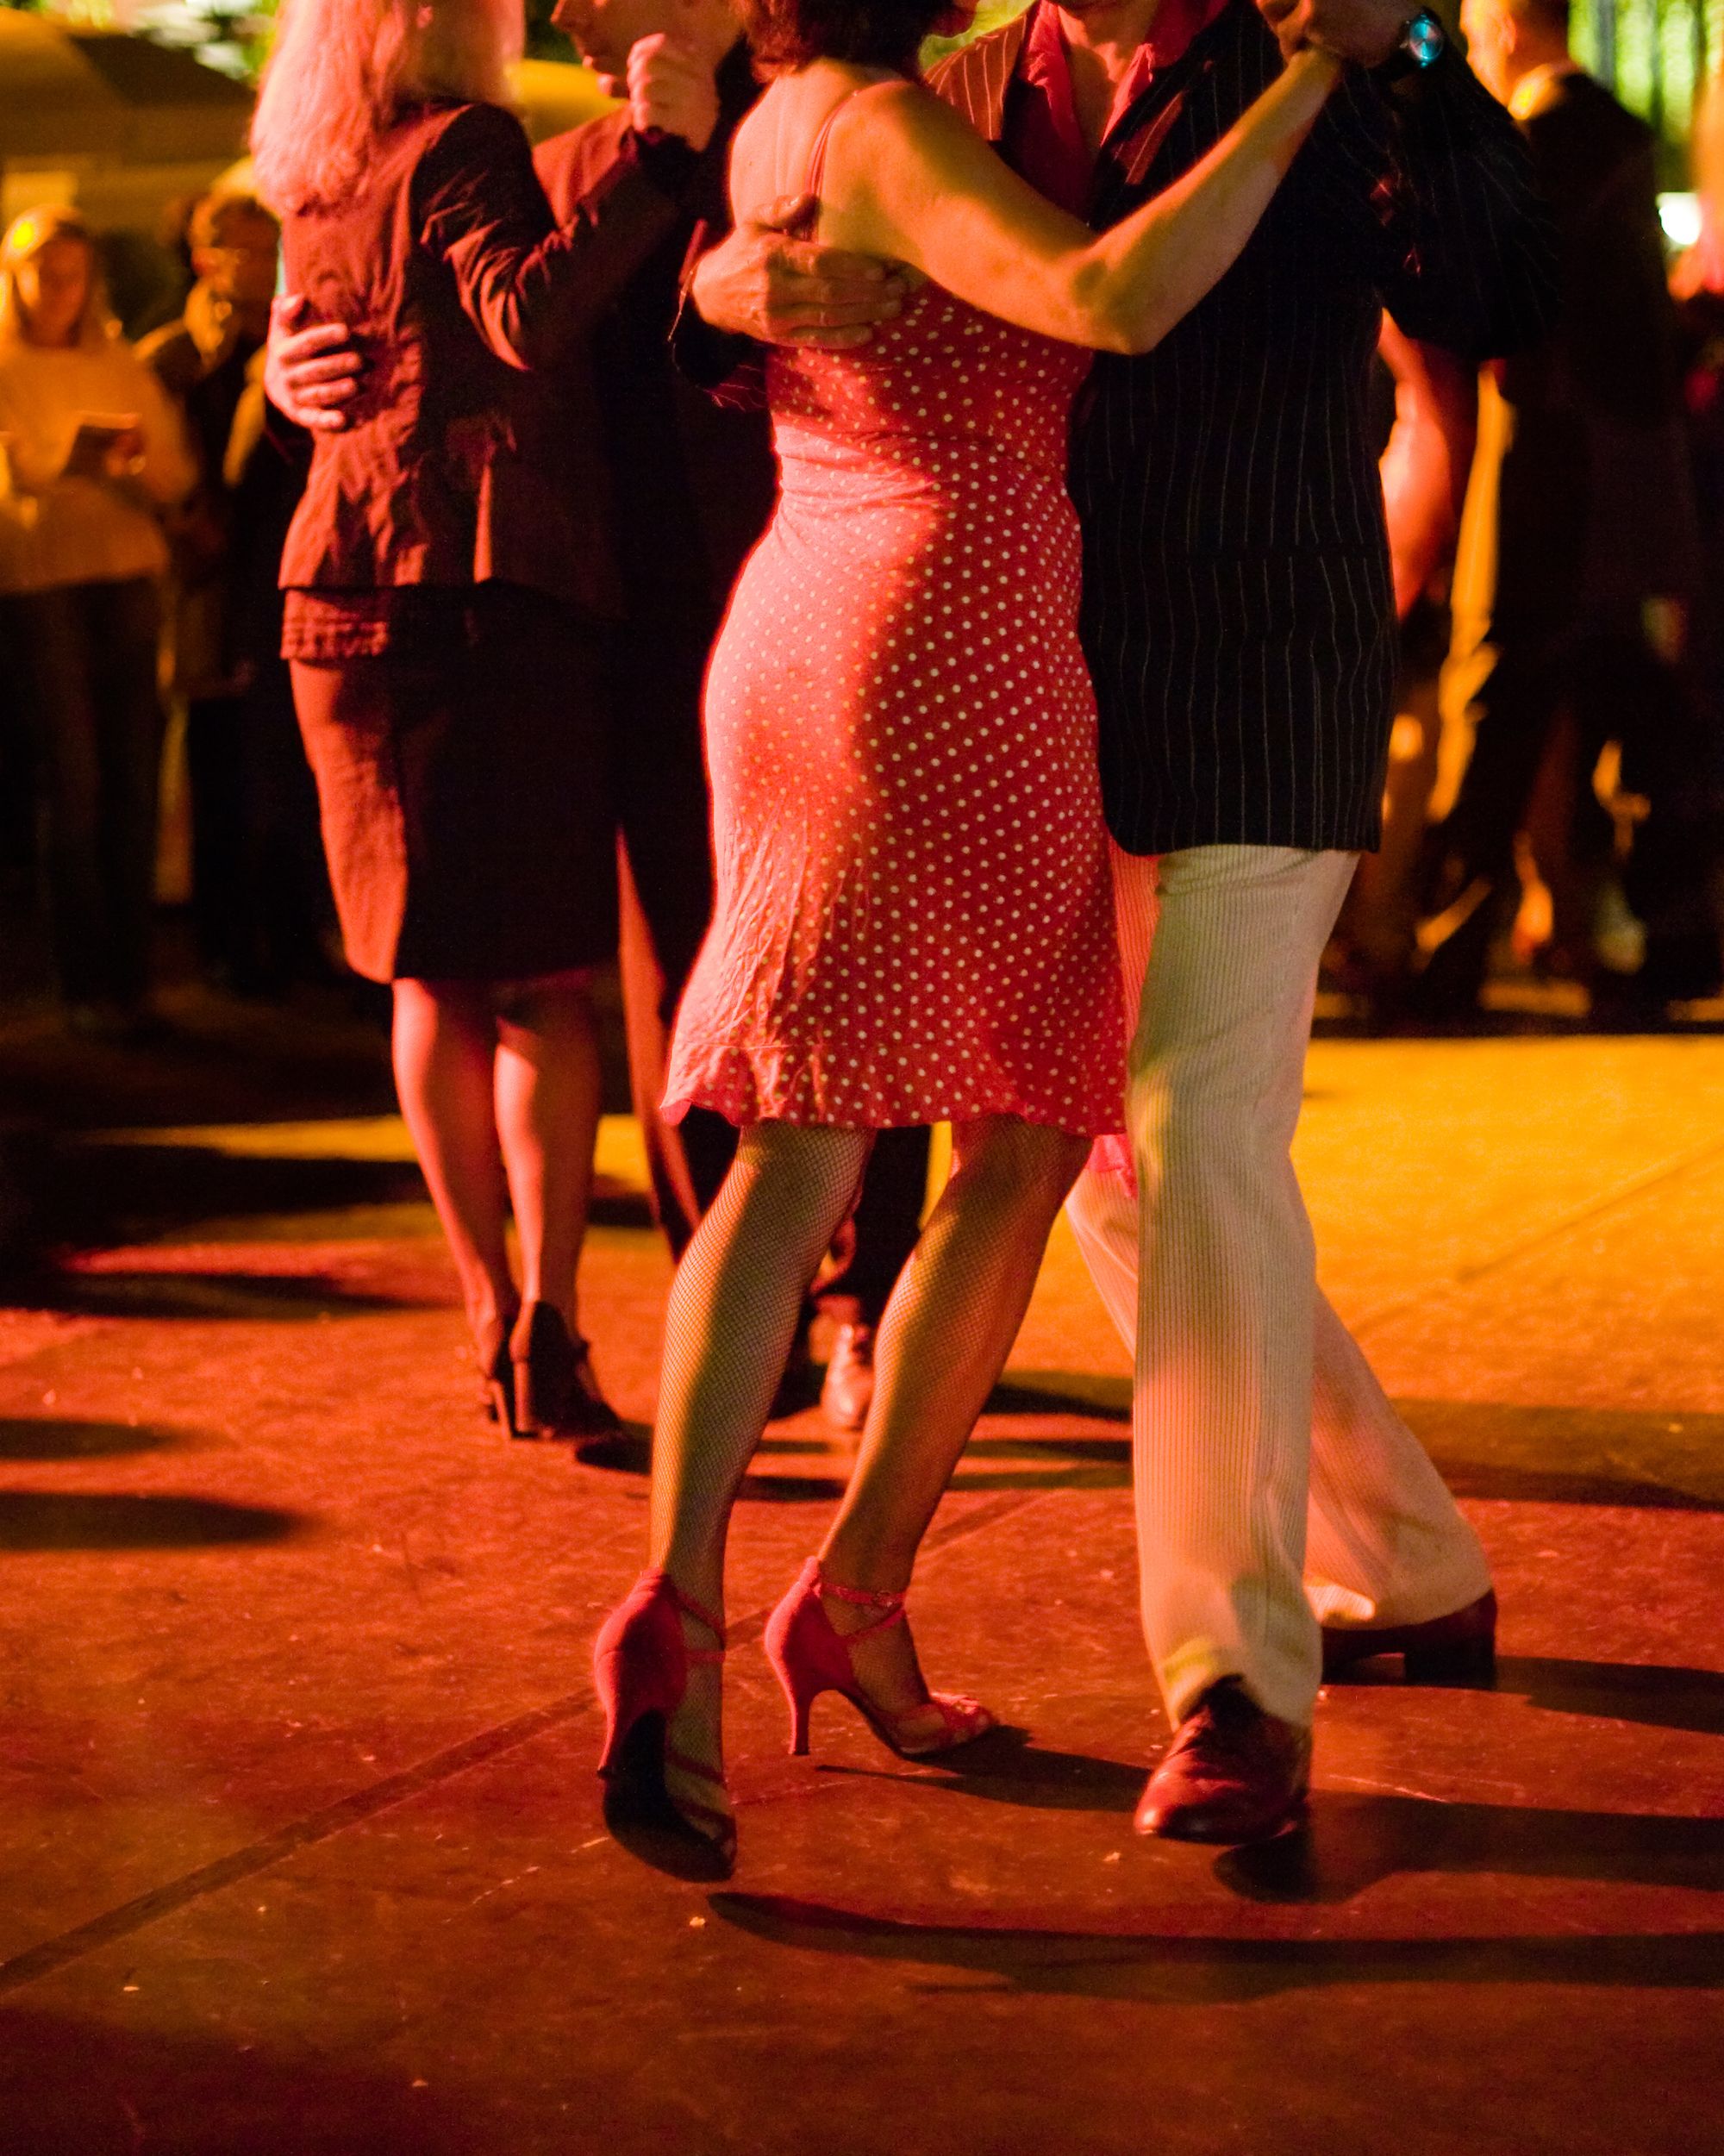 open air milonga at night people dancing argentine tango outdoors, focus on legs of the front couple heads are not in frame natural light, high iso